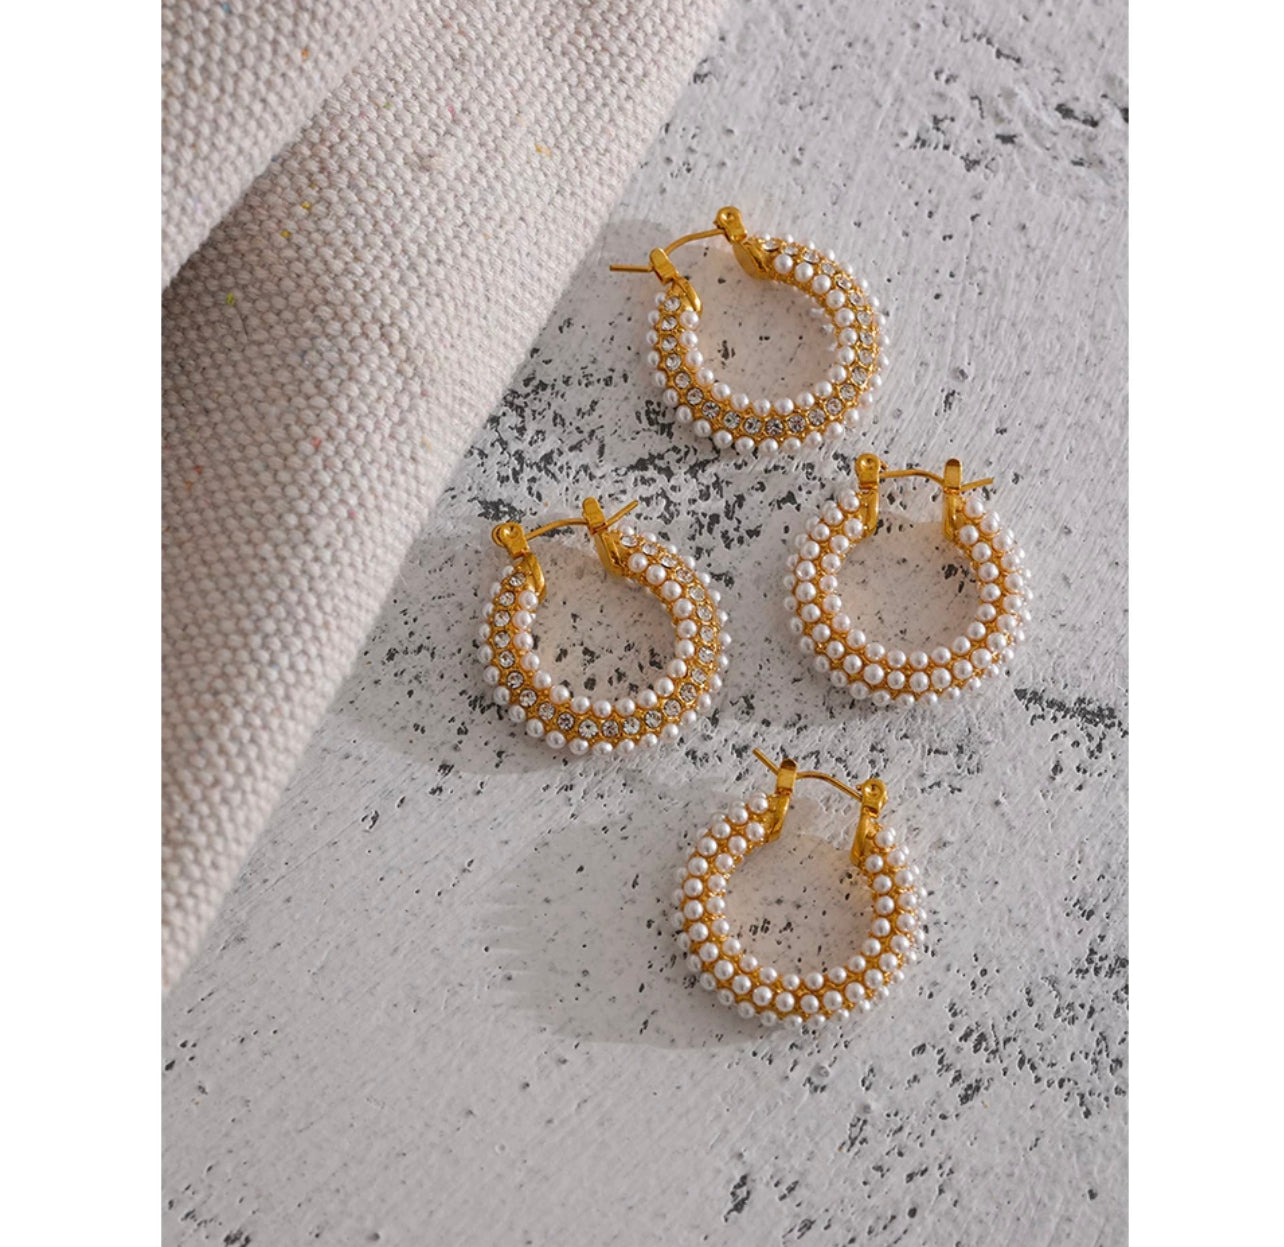 Stainless Steel Pearls with Sparkly CZ Embellishment Hoops Earrings 